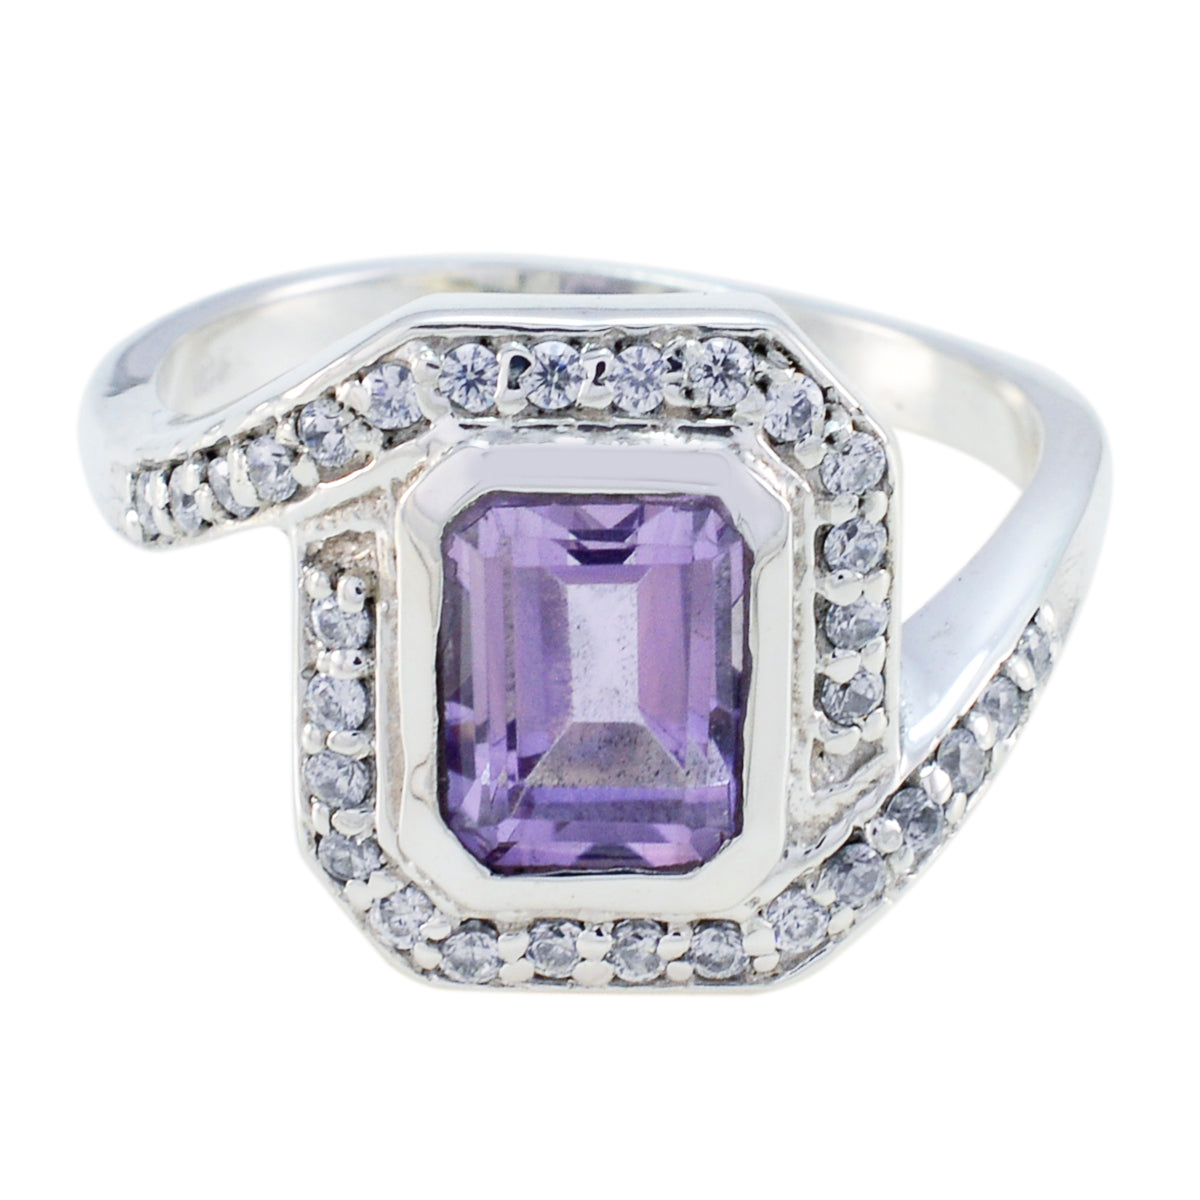 Excellent Gemstones Amethyst Silver Rings Fashion Jewelry Wholesale